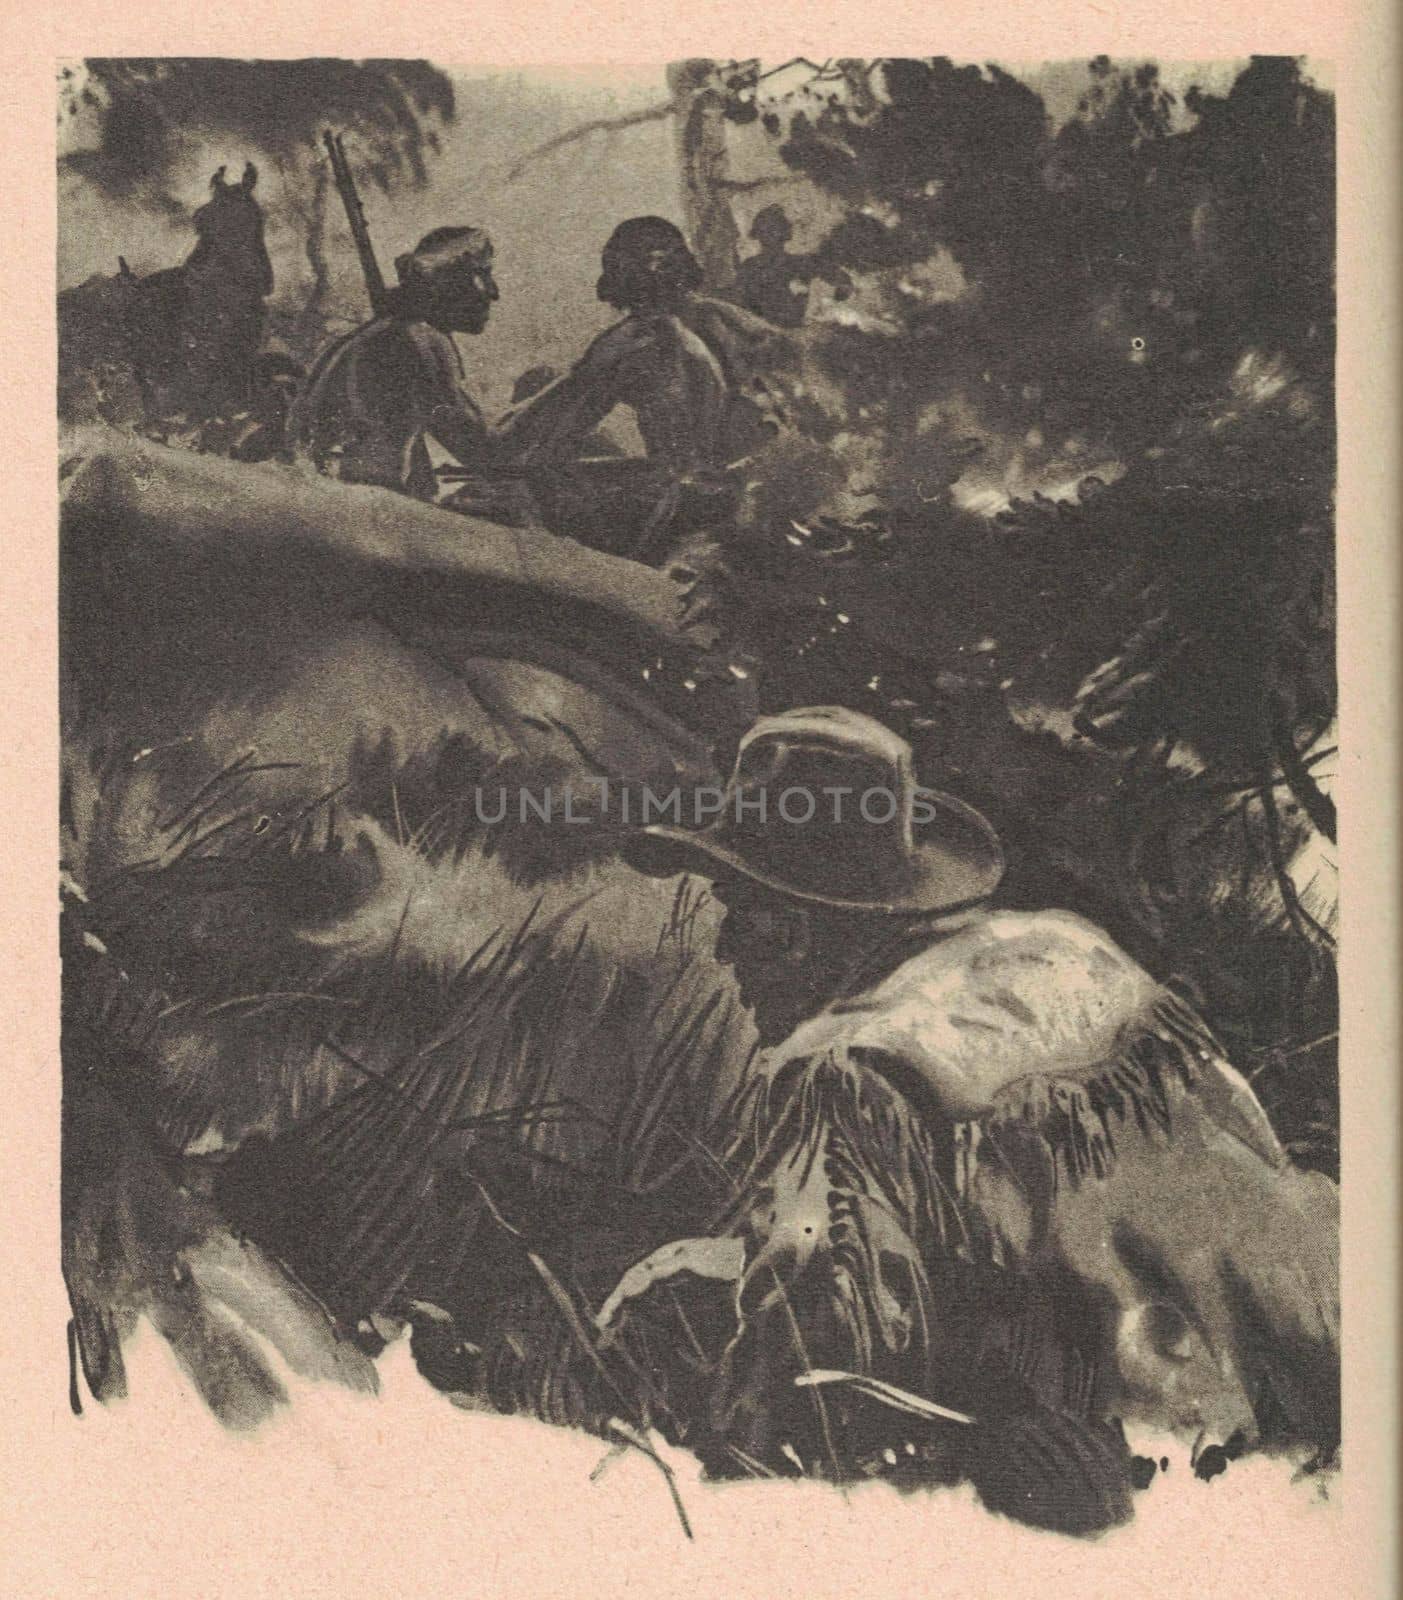 Black and white illustration shows a hidden man spying on American Indians. Drawing shows life in the Wild West. Vintage black and white picture shows adventure life in the previous century by roman_nerud